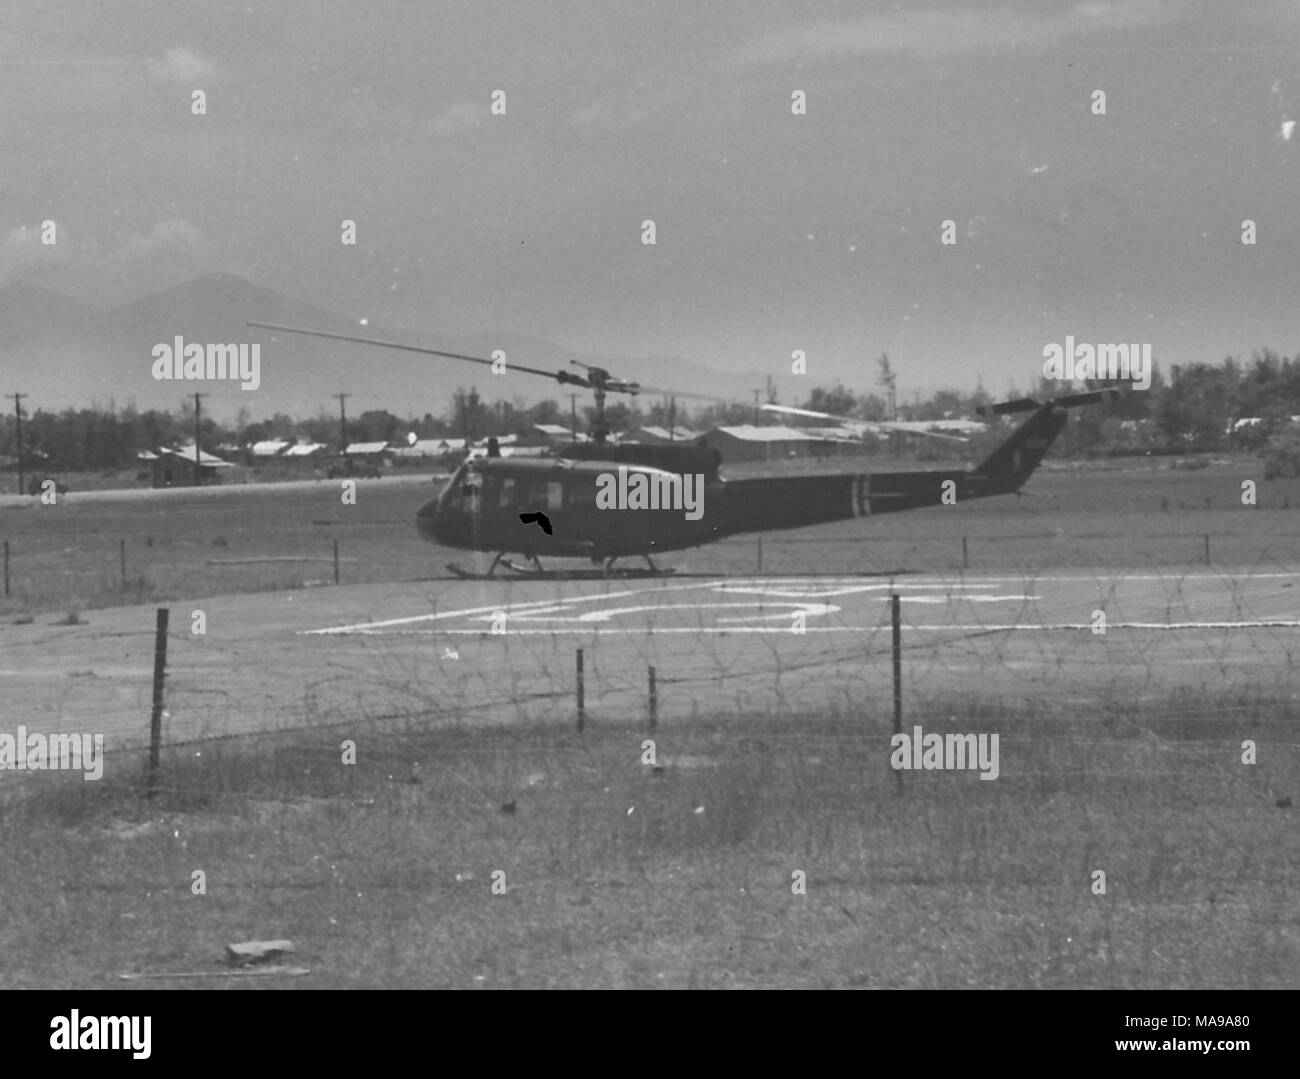 Black and white photograph showing a helicopter docked on an airstrip, with trees and buildings, likely a US Marine Corps military camp, in the background, photographed in Vietnam during the Vietnam War (1955-1975), 1968. () Stock Photo